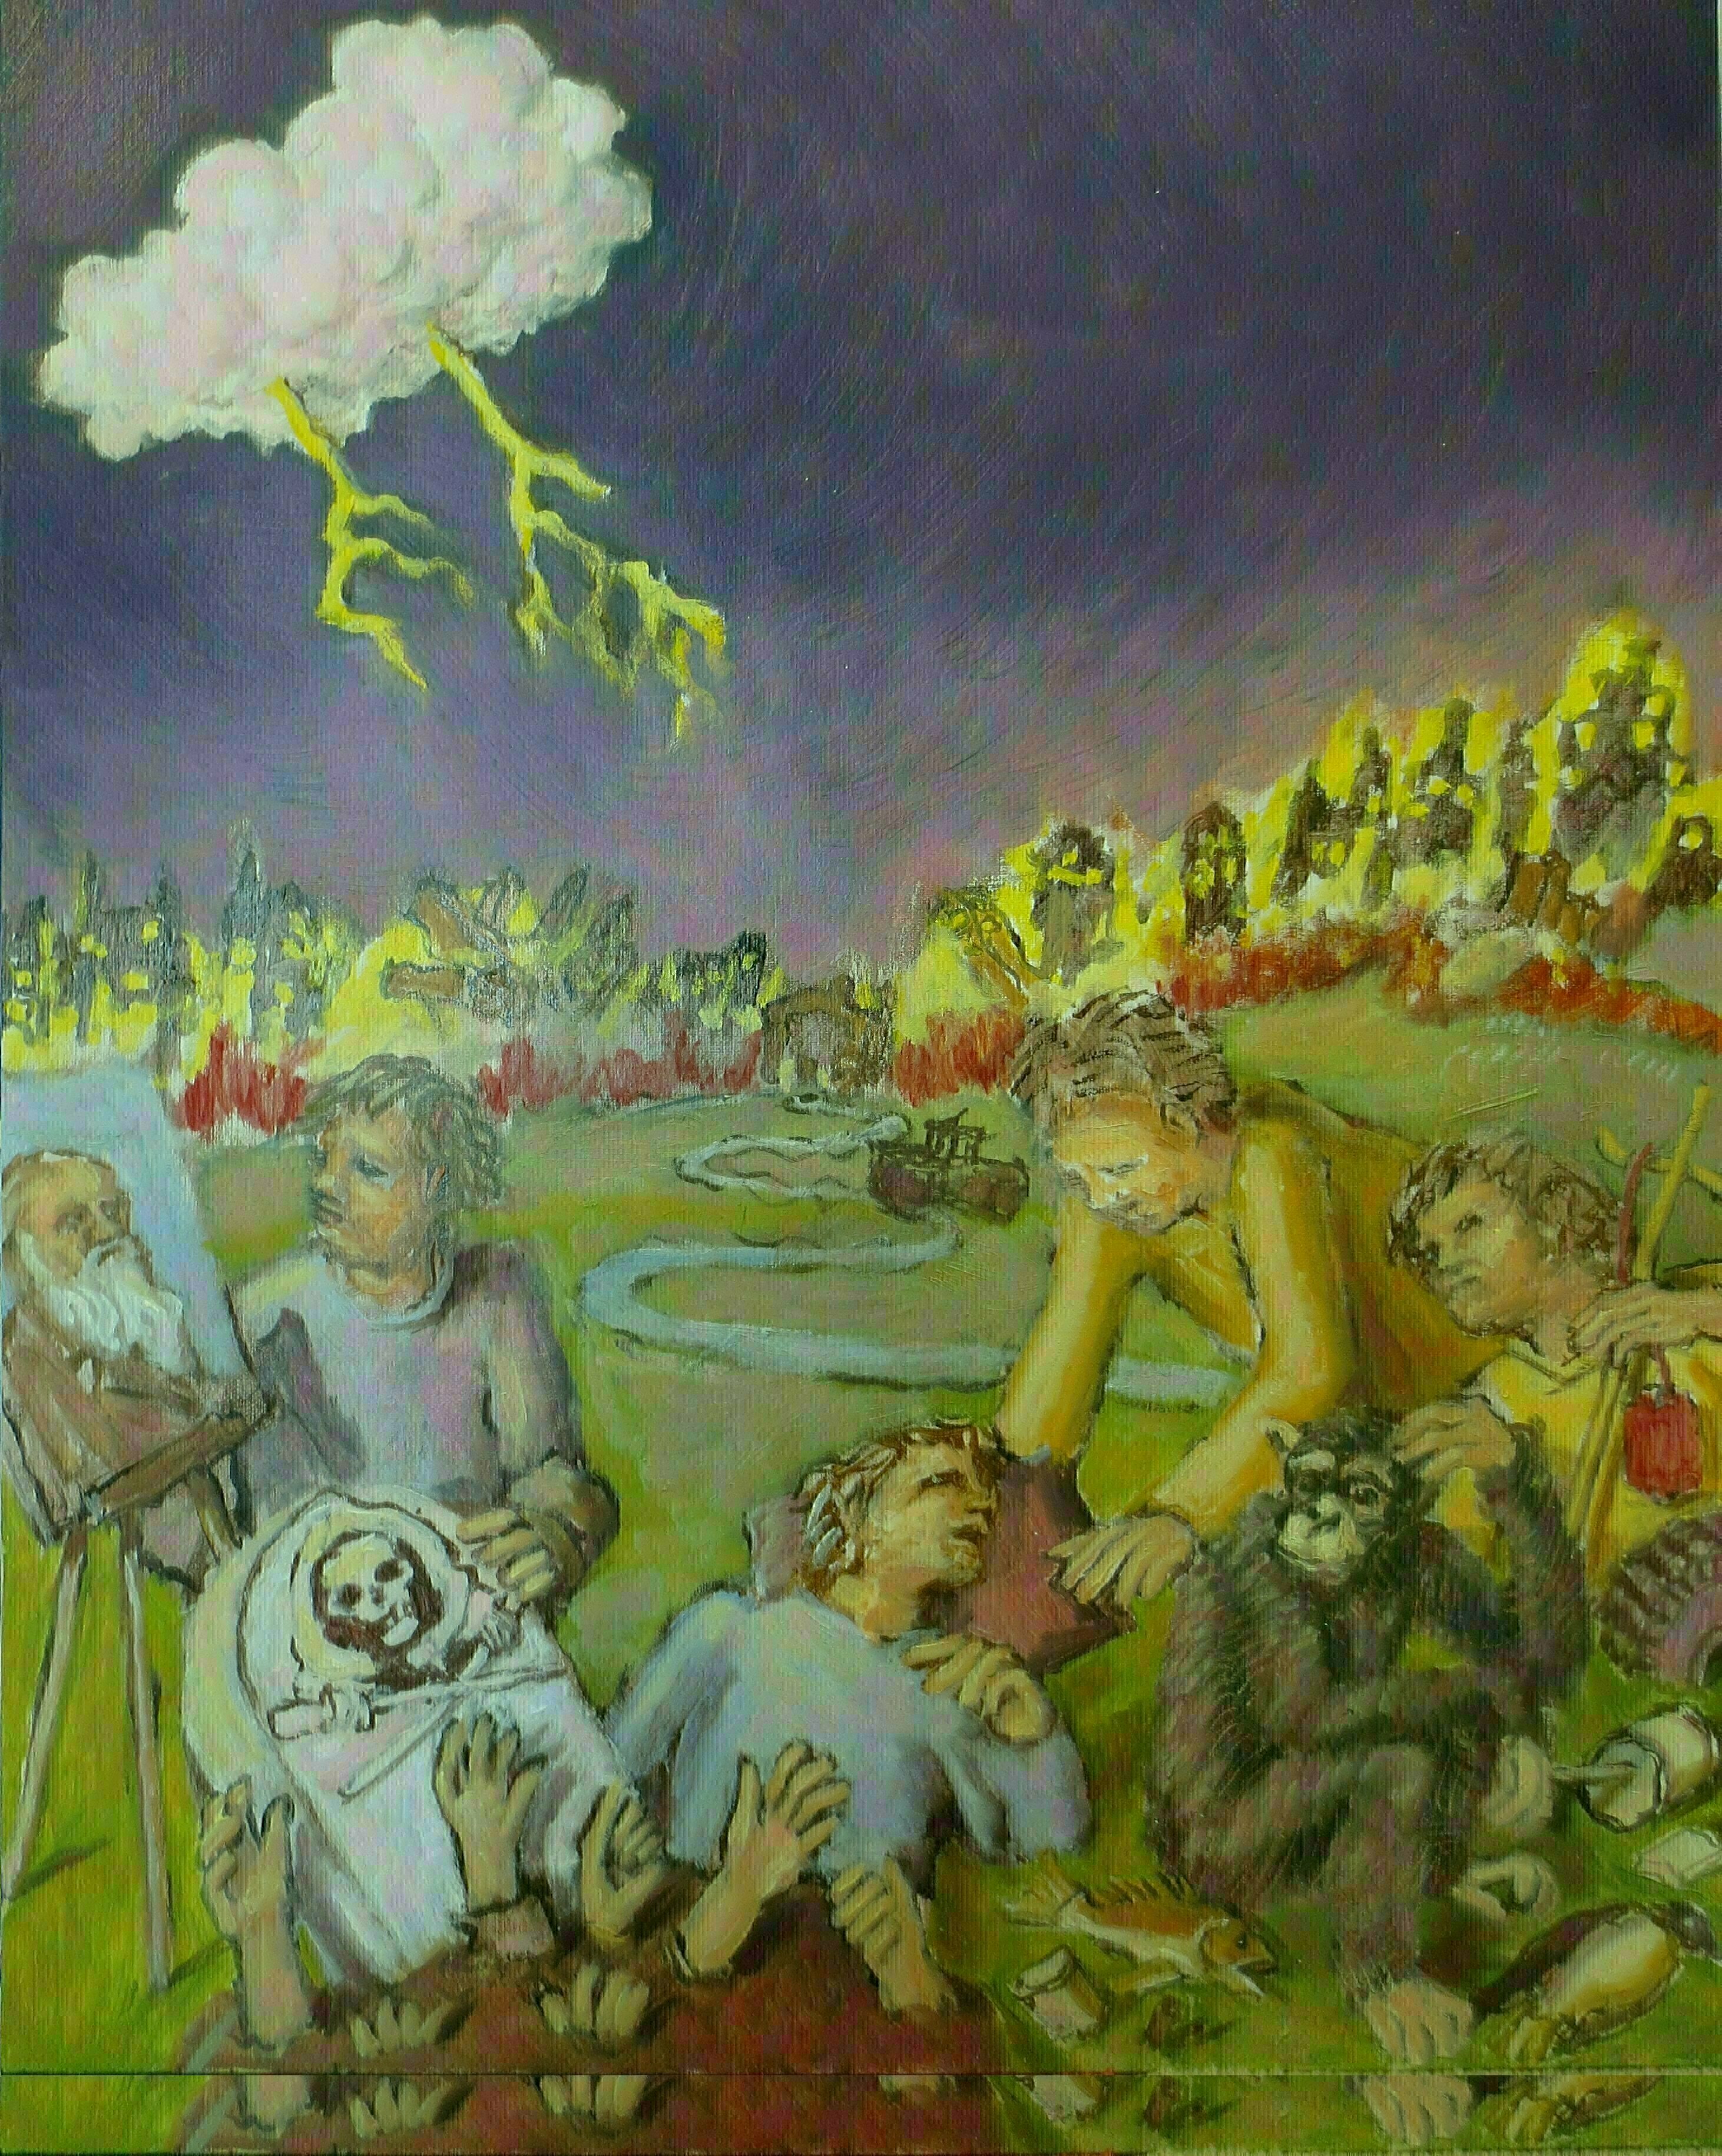 Wendy Lippincott; The Road To Hell, 2020, Original Painting Oil, 18 x 24 inches. Artwork description: 241 The Road to Hell is Paved with Good Intentions...